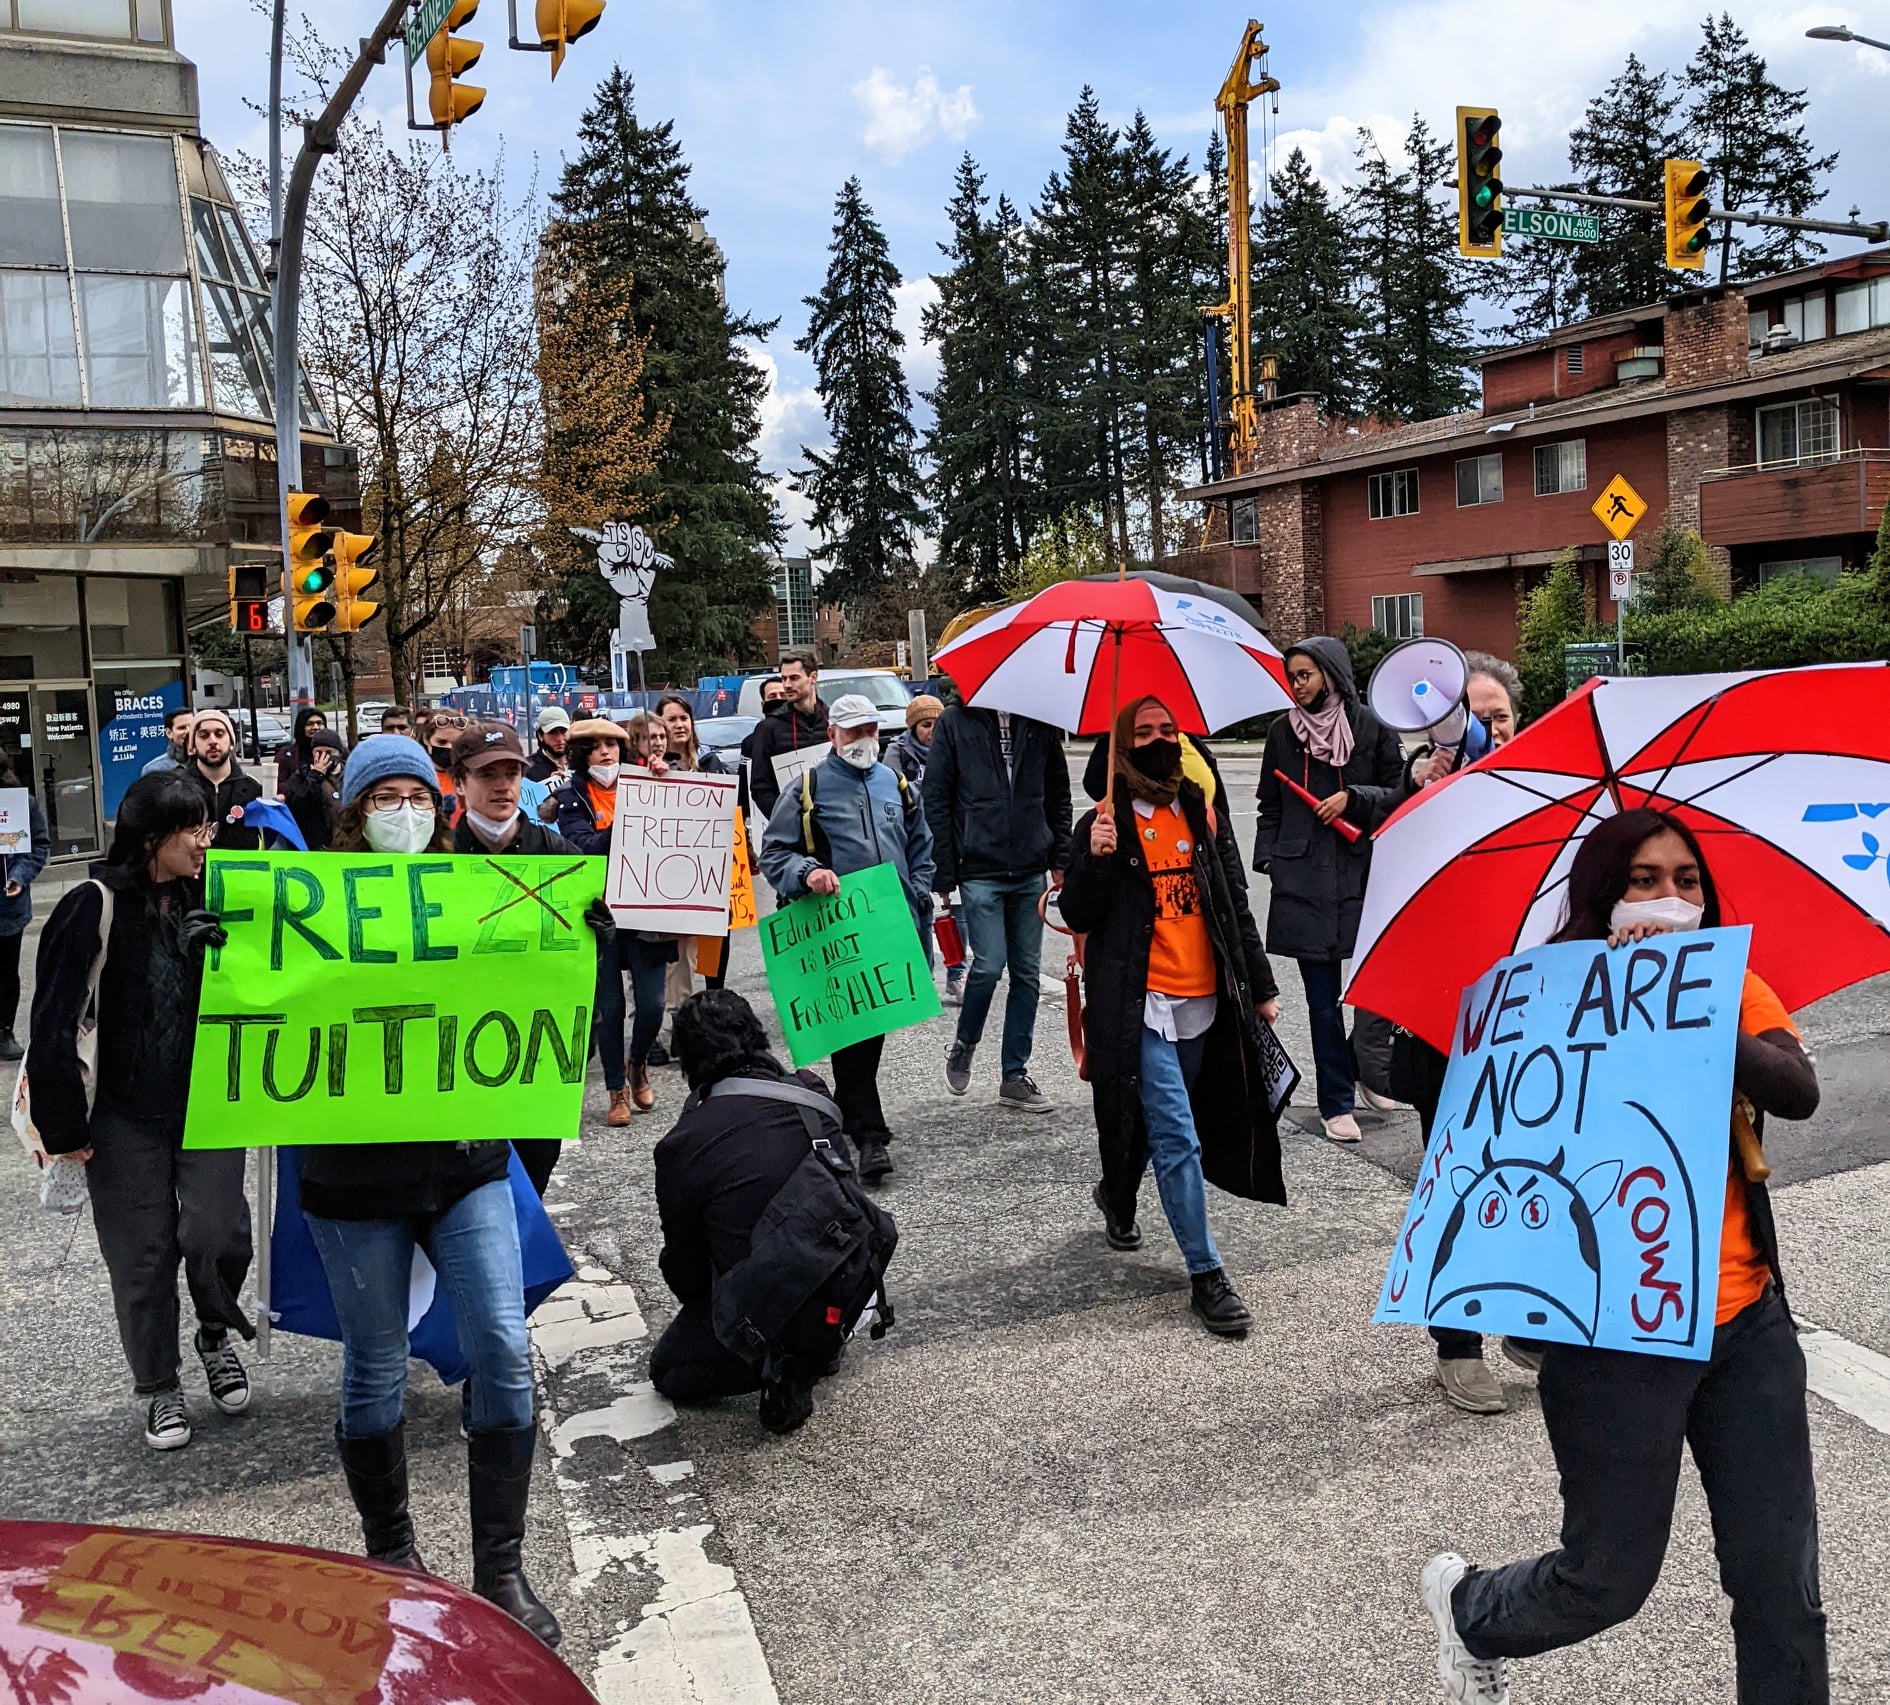 Numerous protestors are seen crossing the street. Most are holding signs that read “Free Tuition” and “We Are Not Cash Cows.” Others hold umbrellas while one individual is holding a megaphone.